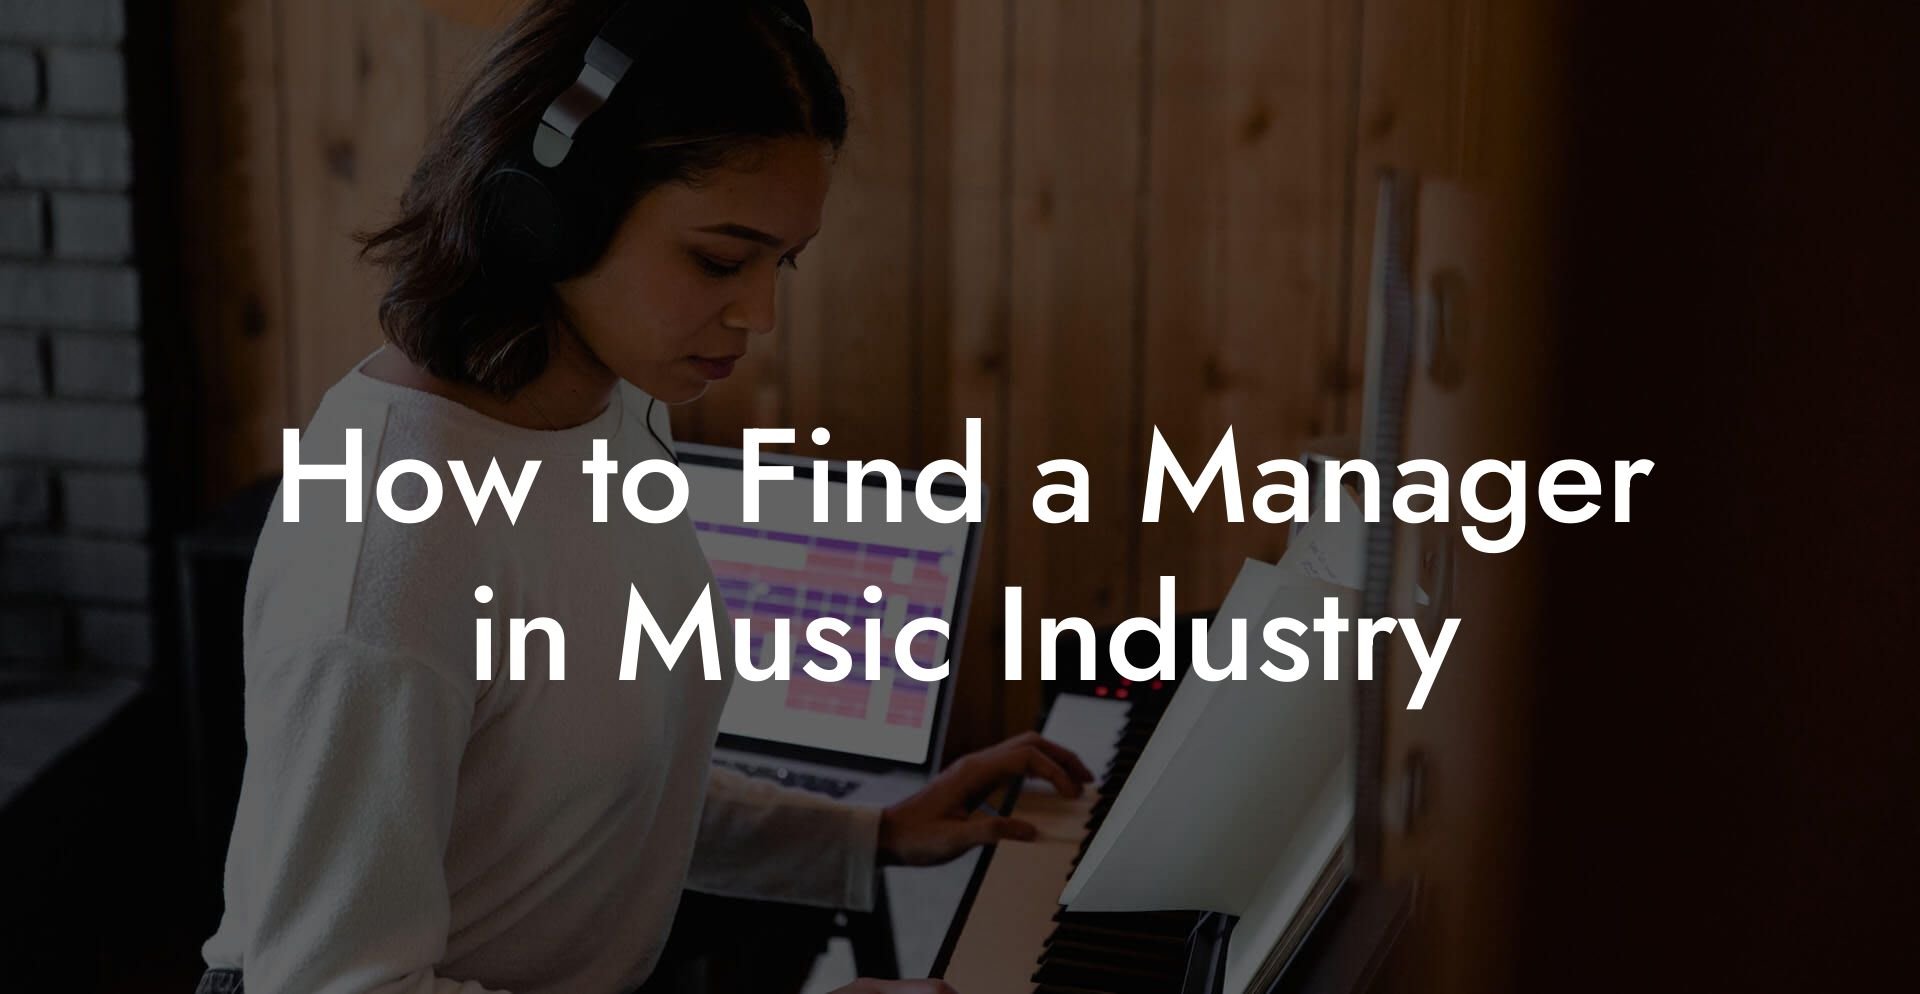 How to Find a Manager in Music Industry